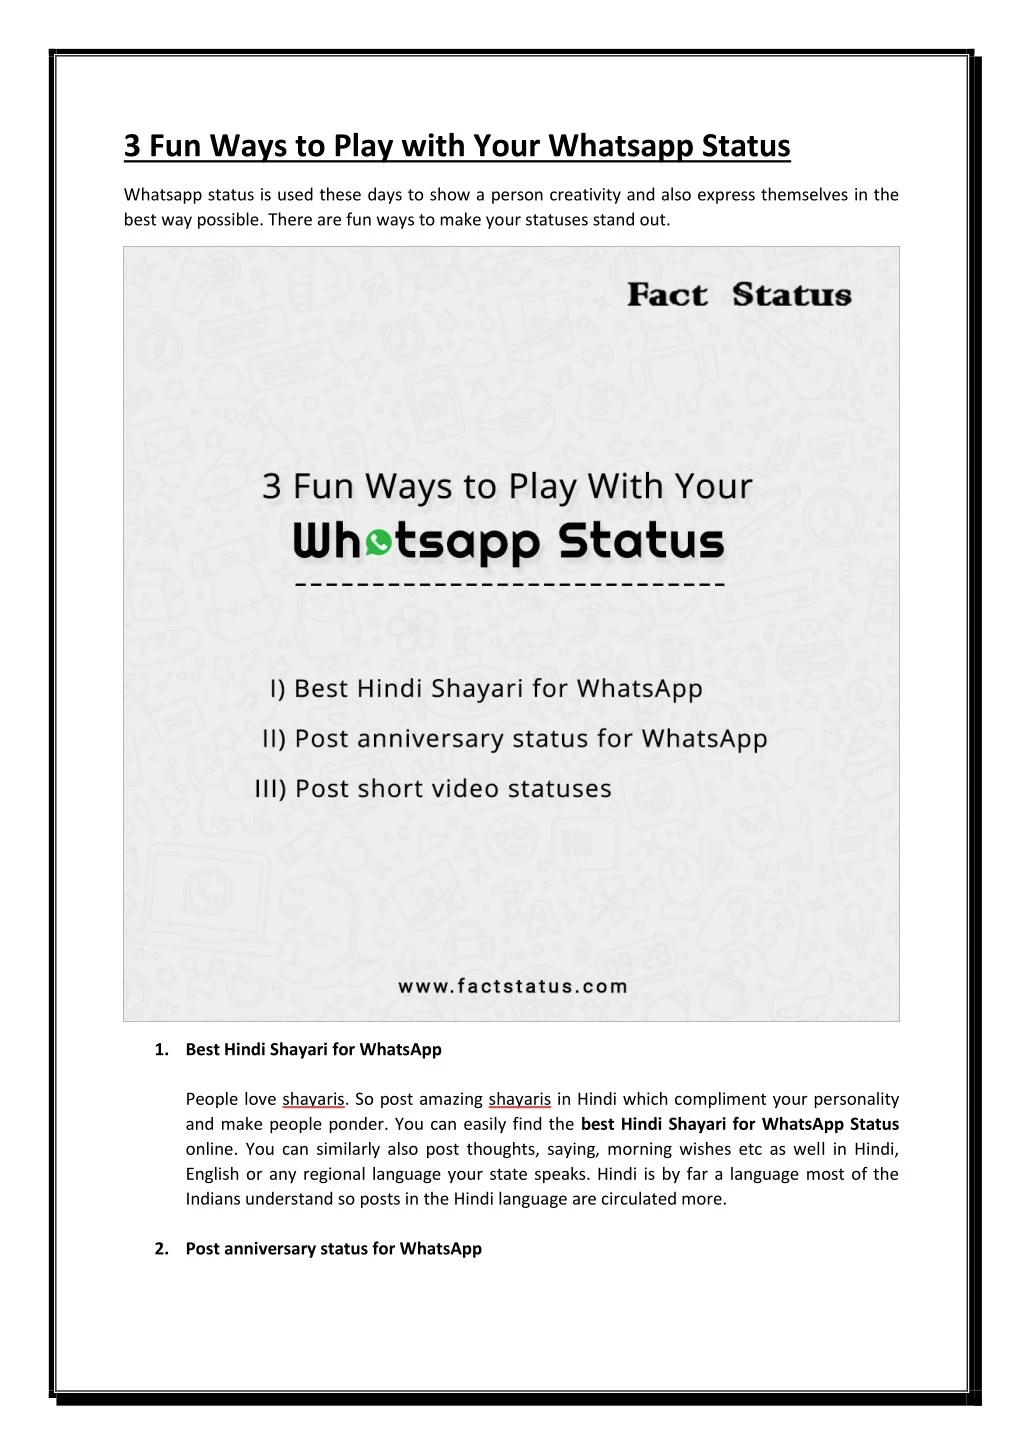 3 fun ways to play with your whatsapp status